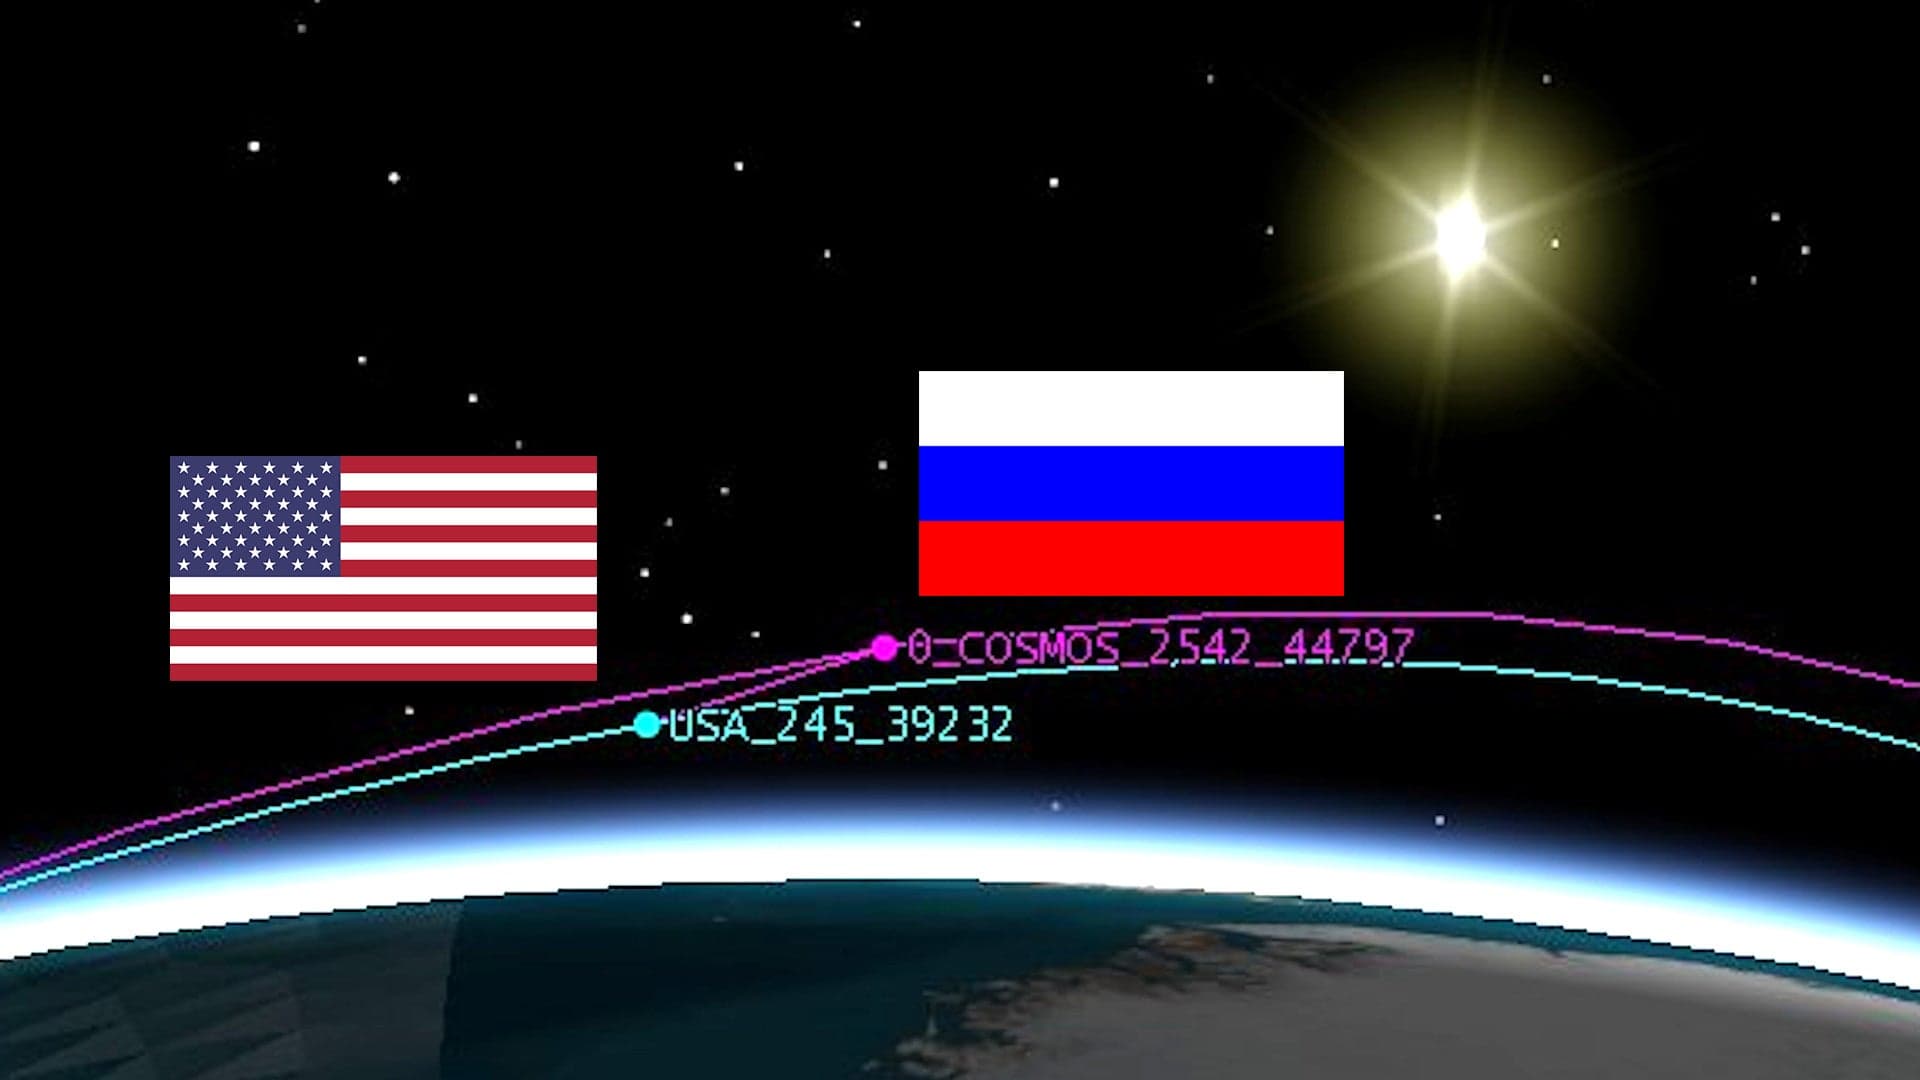 A Russian “Inspector” Spacecraft Now Appears To Be Shadowing An American Spy Satellite